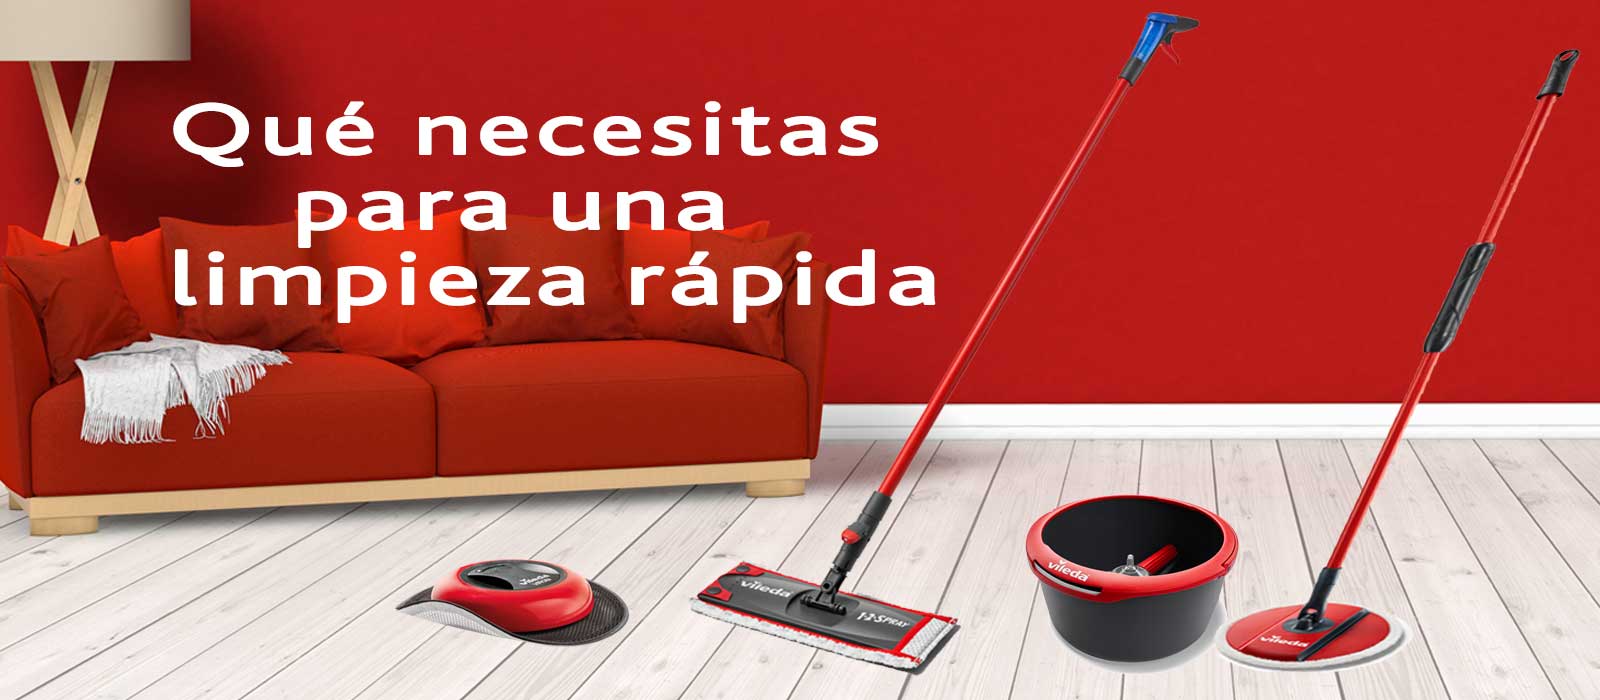 ES_modern-cleaning-tools_page-banner_1600x700.jpg